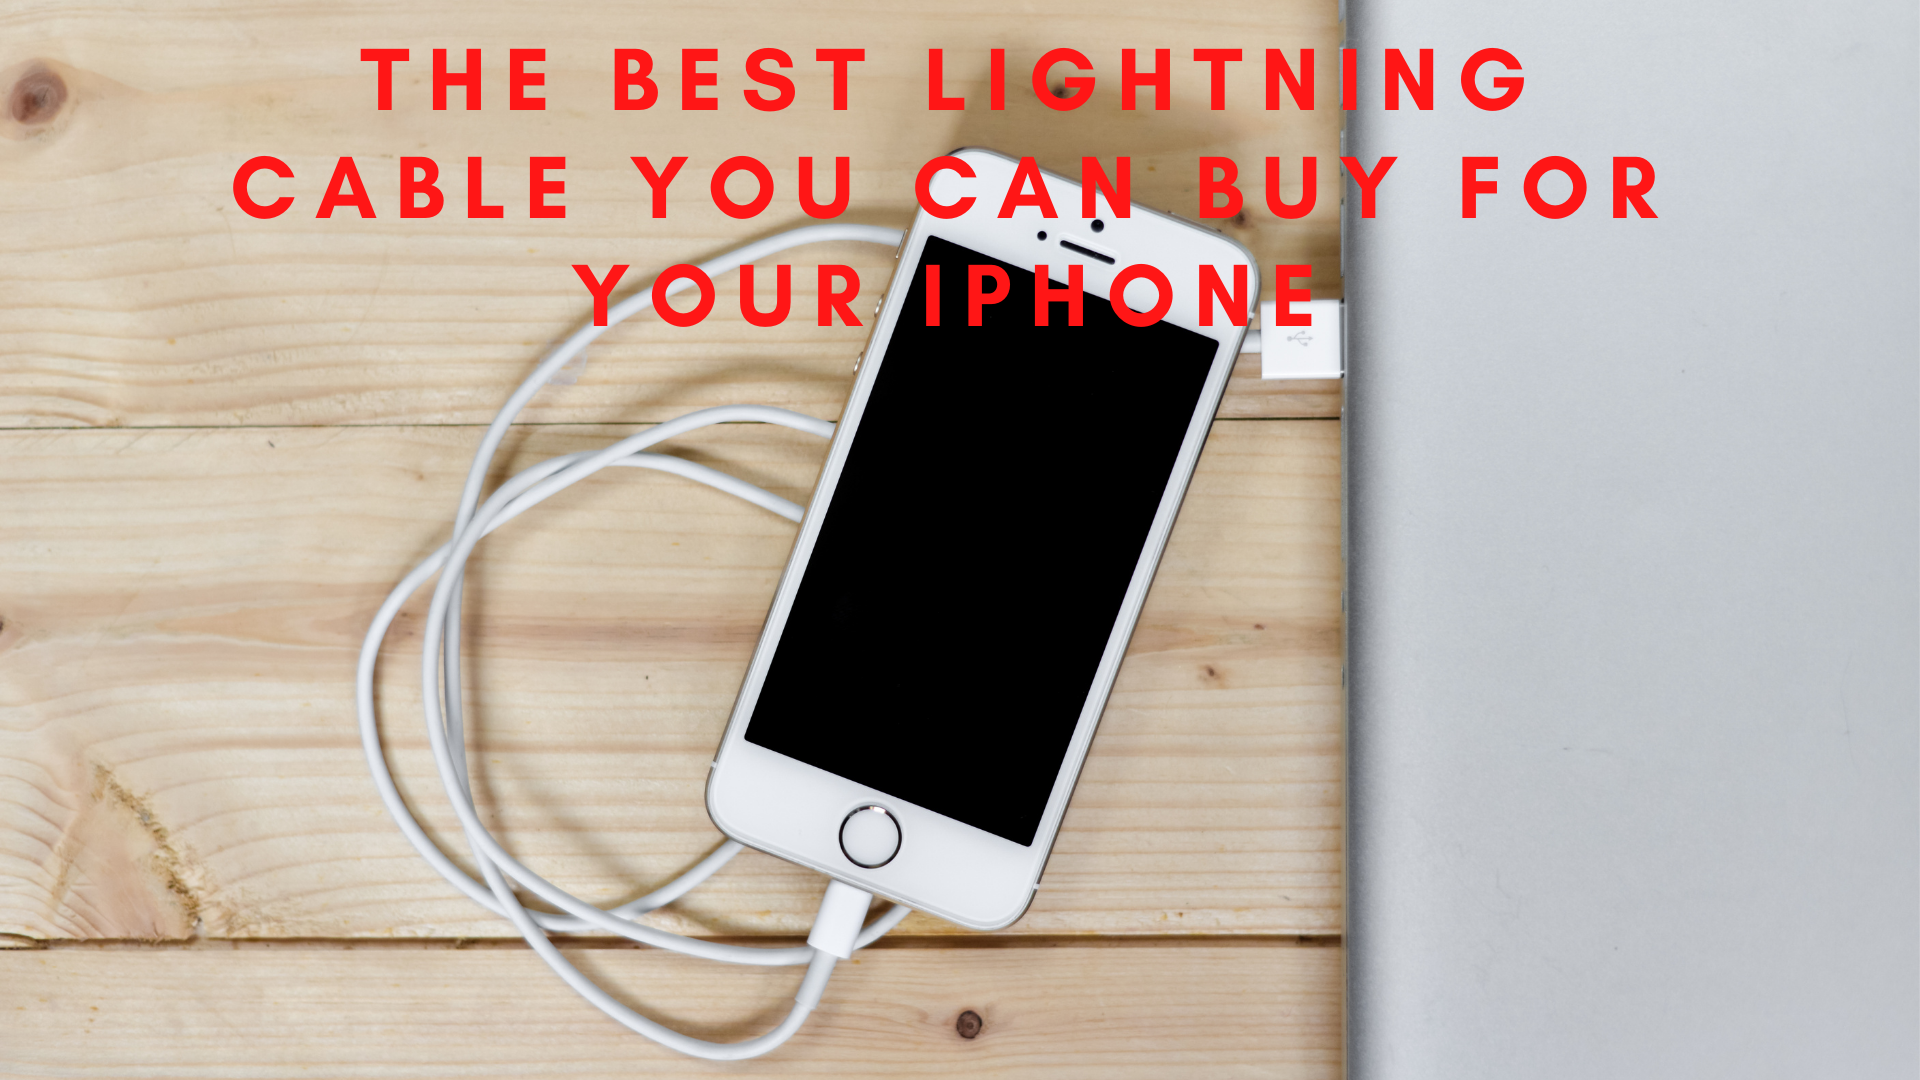 The Best Lightning Cable You Can Buy for Your iPhone